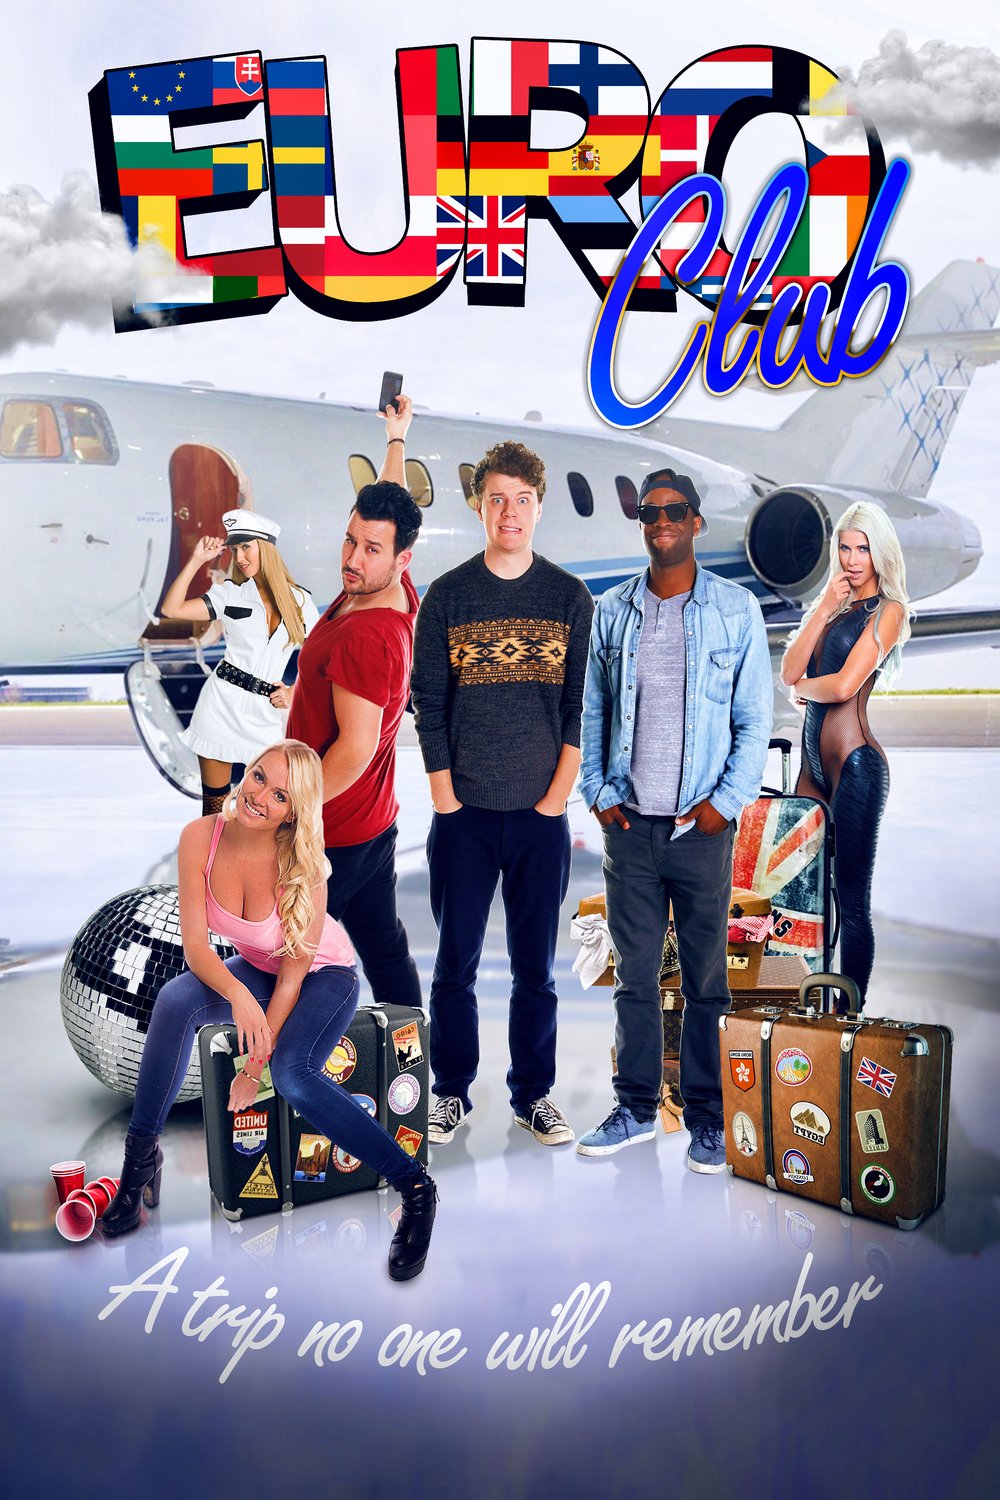 Poster of the movie EuroClub